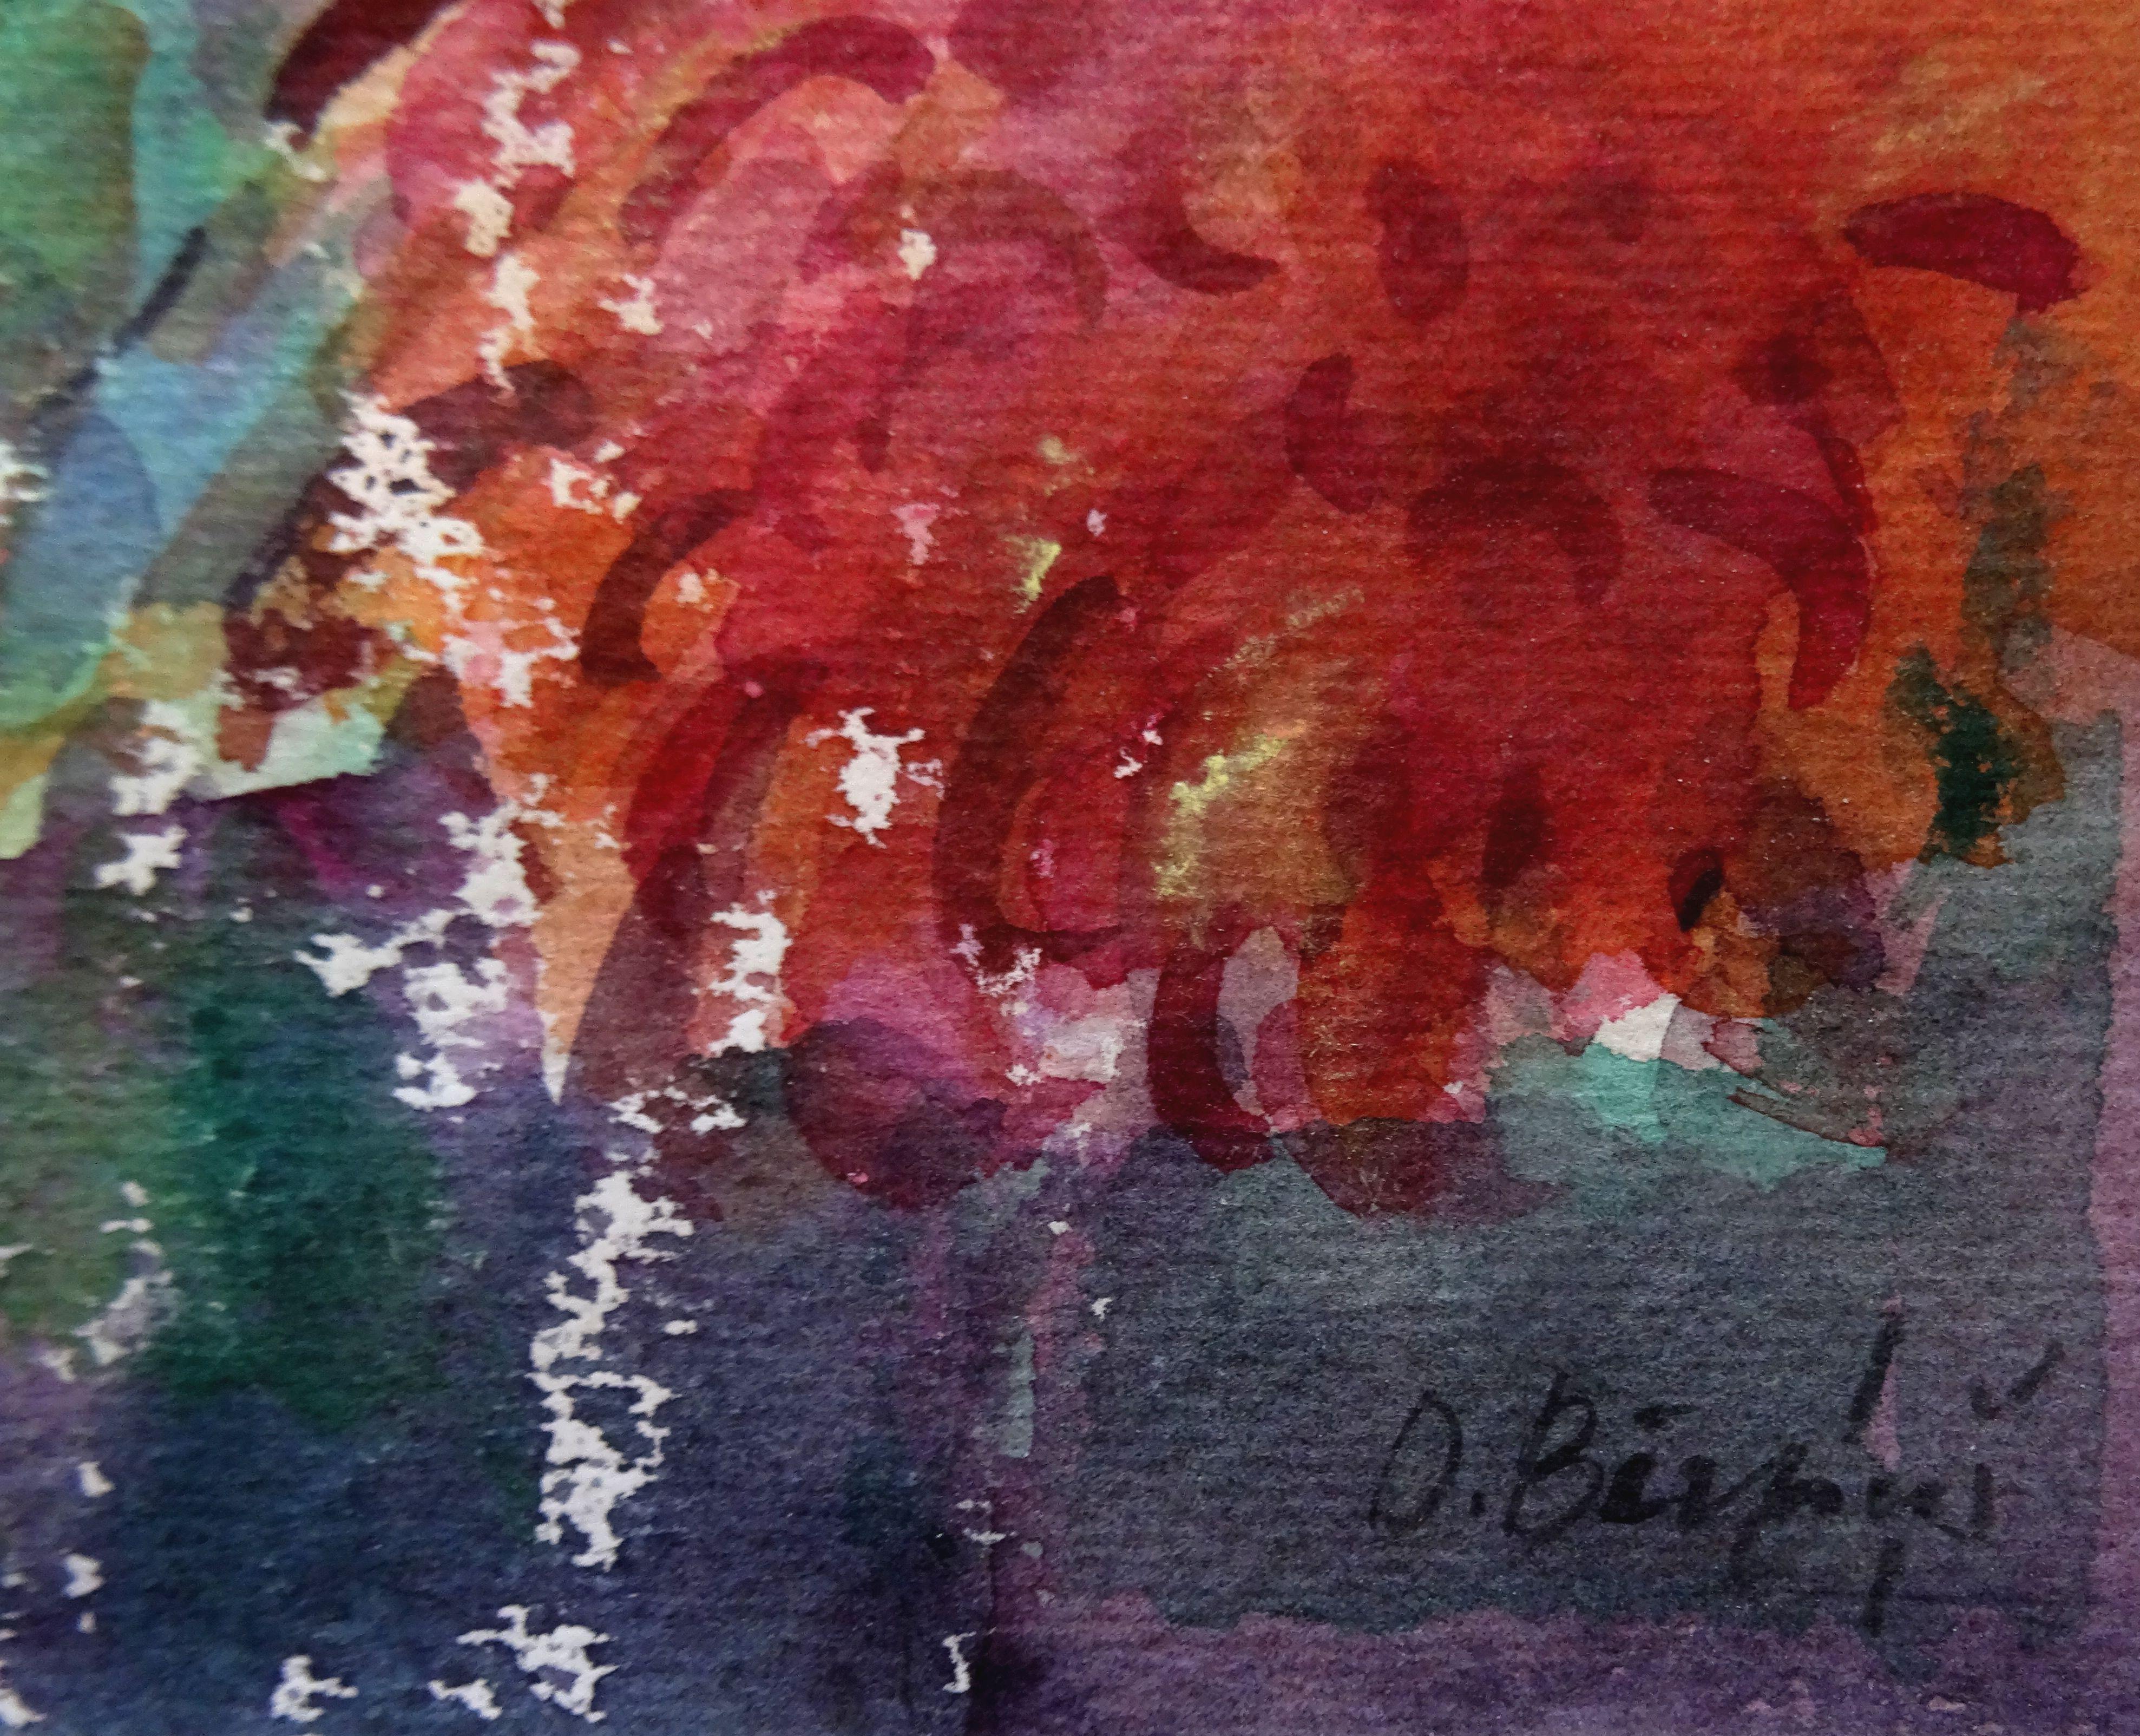 Asters. 1993. Paper, watercolor, 44x19 cm - Painting by Oskars Berzins